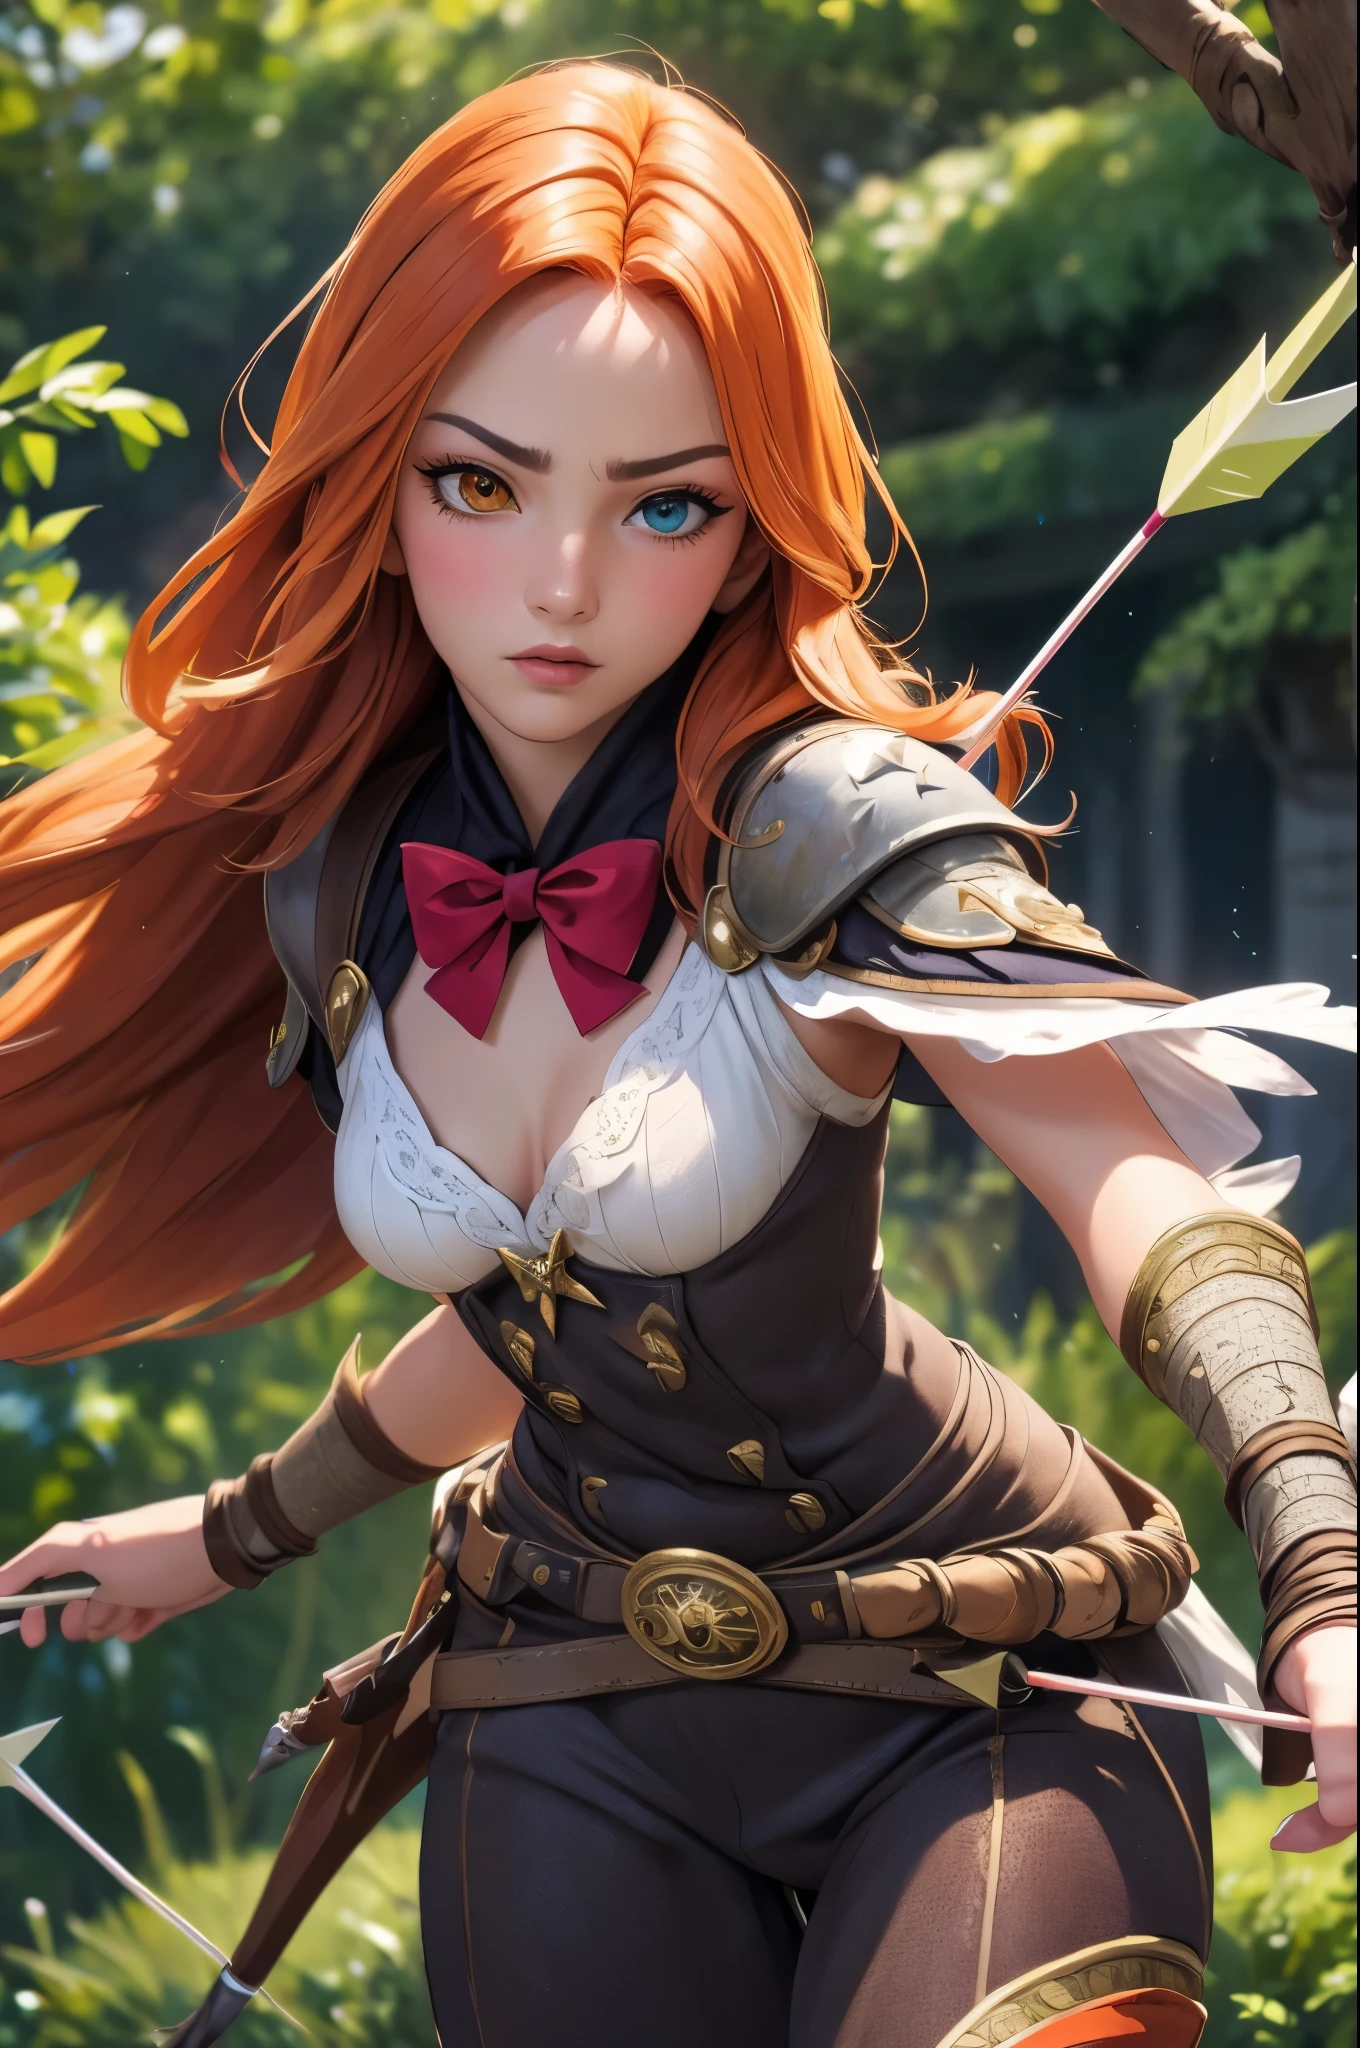 (best quality,4k,highres),ultra-detailed,realistic,portrait style,bright colors,dynamic lighting,monster hunter reference,majestic landscape,orange hair,(heterochromia:1.1),small,fierce and determined expression,elaborate archer costume,arrow pulled back in the bow,strong physical stance,flying arrows in the background,impressive bow design,foreboding atmosphere,flawless makeup,sharp focus,detailed facial features,lush greenery,sunlight filtering through trees,dappled shadows,strong perspective,highly textured outfit,craftsmanship attention to fine details,colorful backdrop,exquisite jewelry,fluid and elegant movement,beautifully curved bow,confident and commanding presence,fantasy adventure theme.